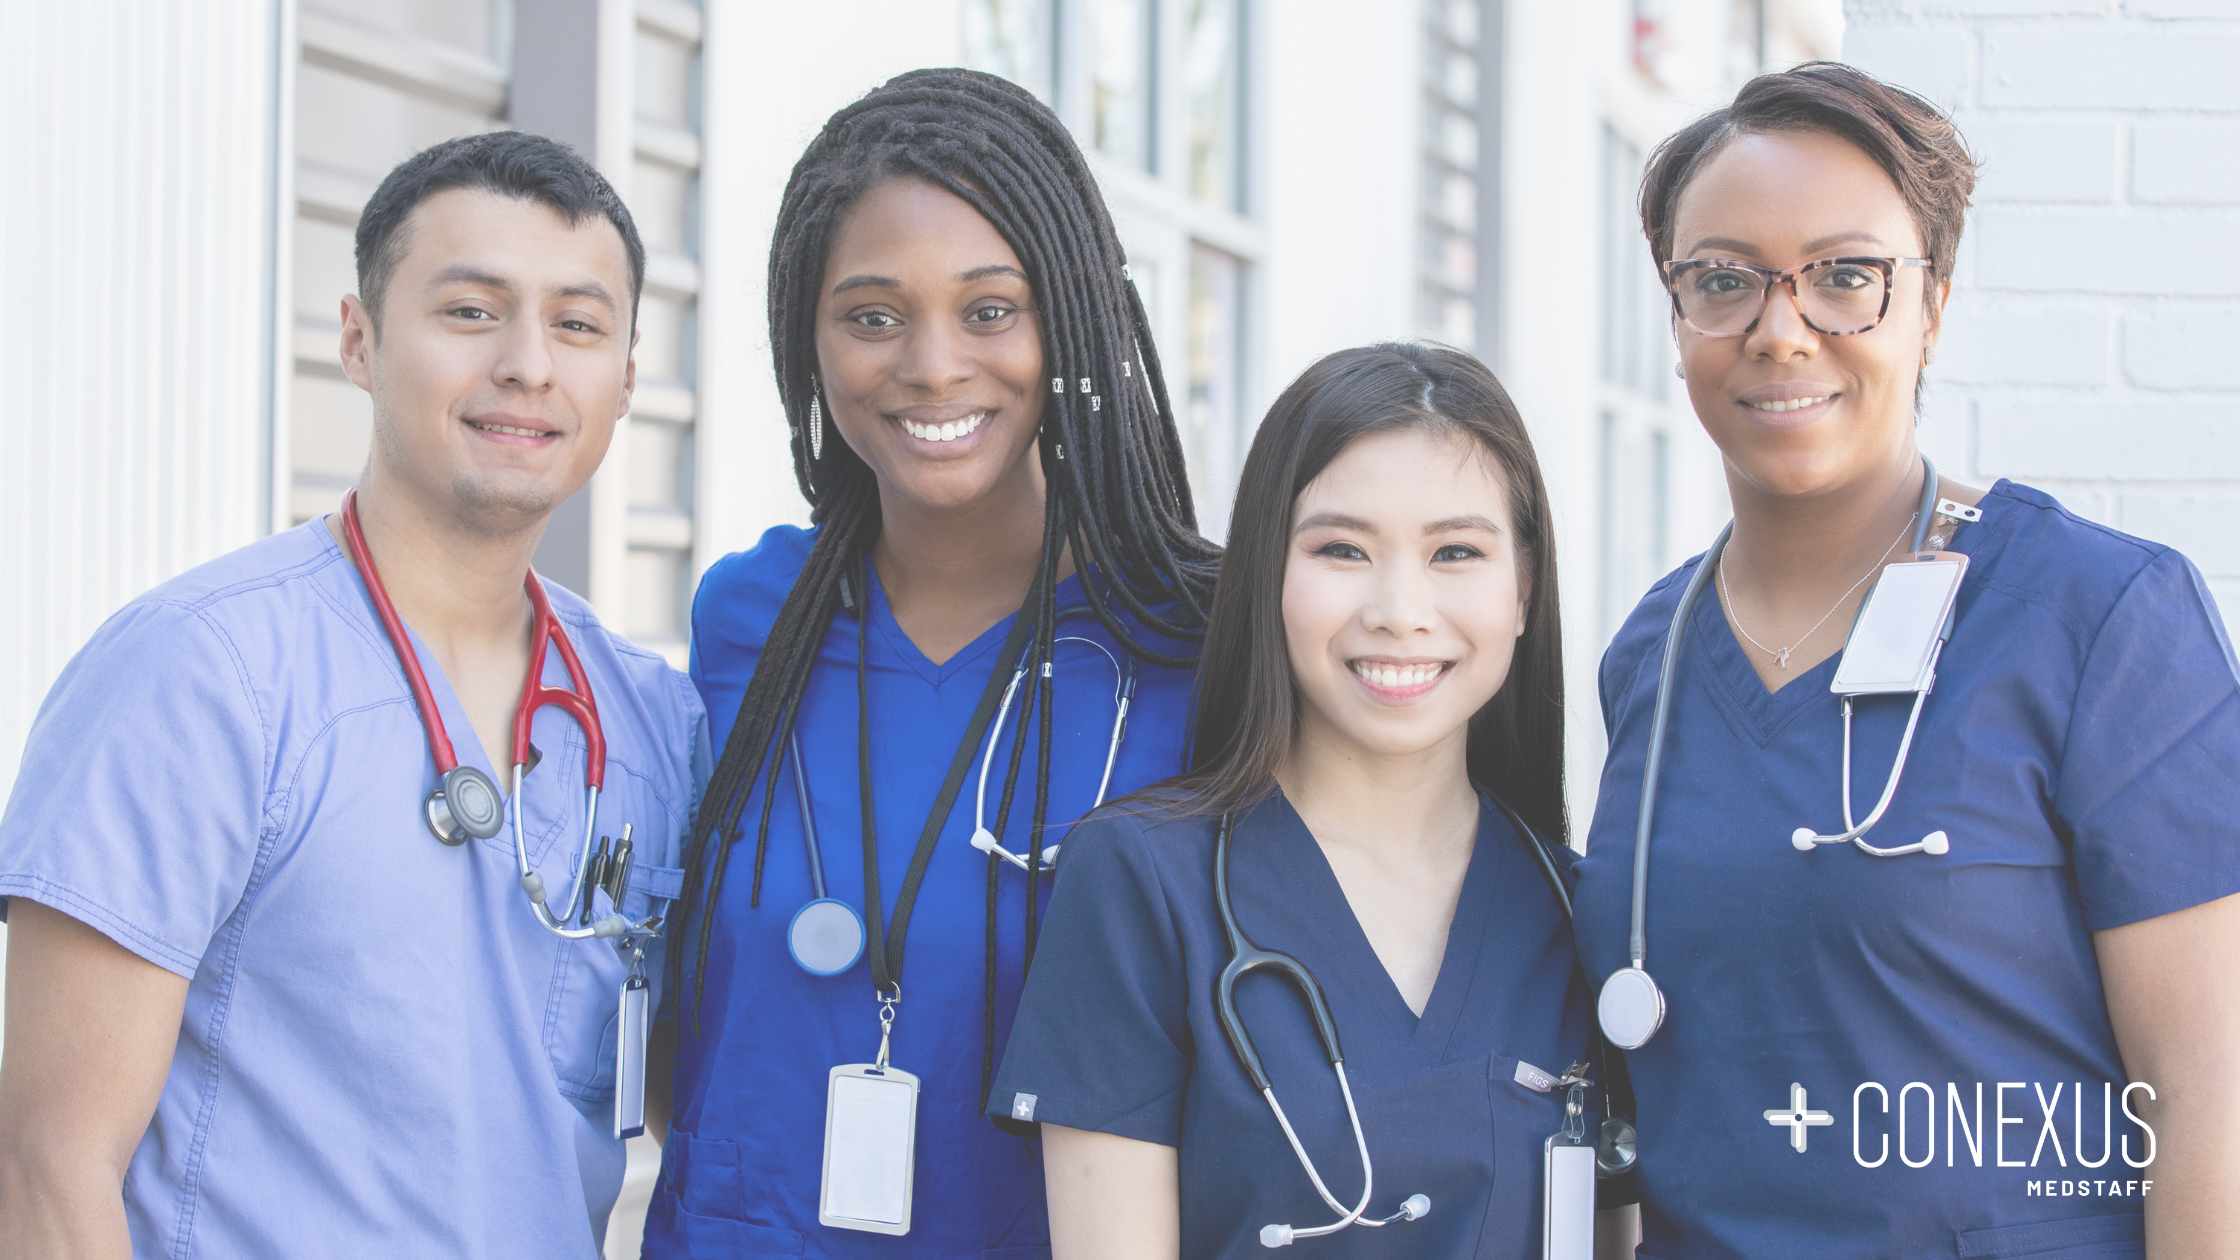 Diversity in healthcare extends to the care of patients as cultural competence is necessary for responding to people of varying backgrounds.